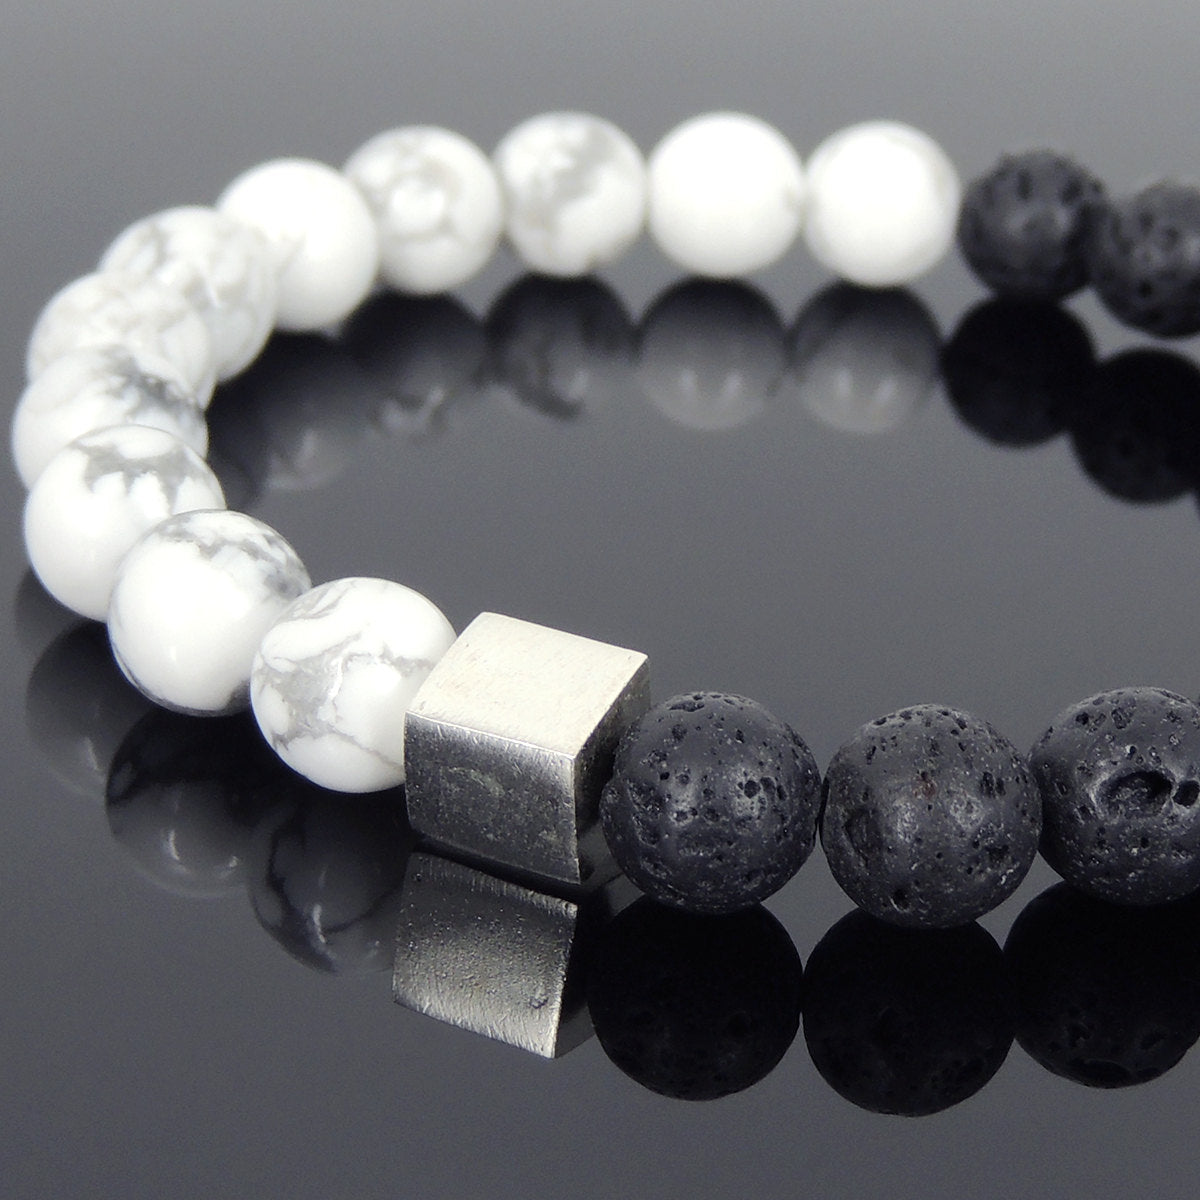 8mm Lava Rock & White Howlite Healing Stone Bracelet with S925 Sterling Silver Geometric Cube Balance Bead - Handmade by Gem & Silver BR677